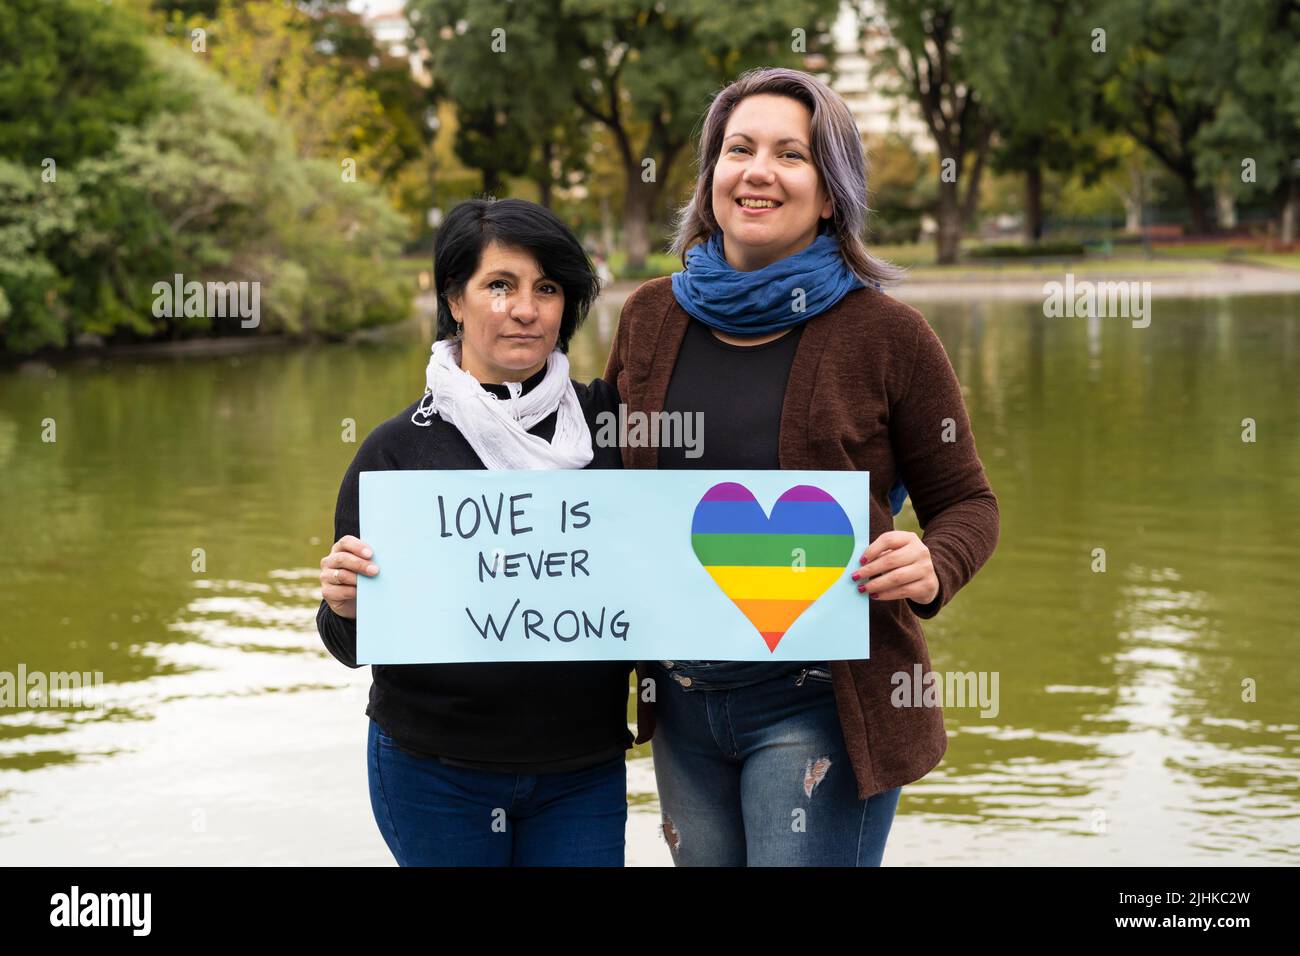 Love is never wrong. Cheerful queer couple holding a message supporting the LGBT community Stock Photo